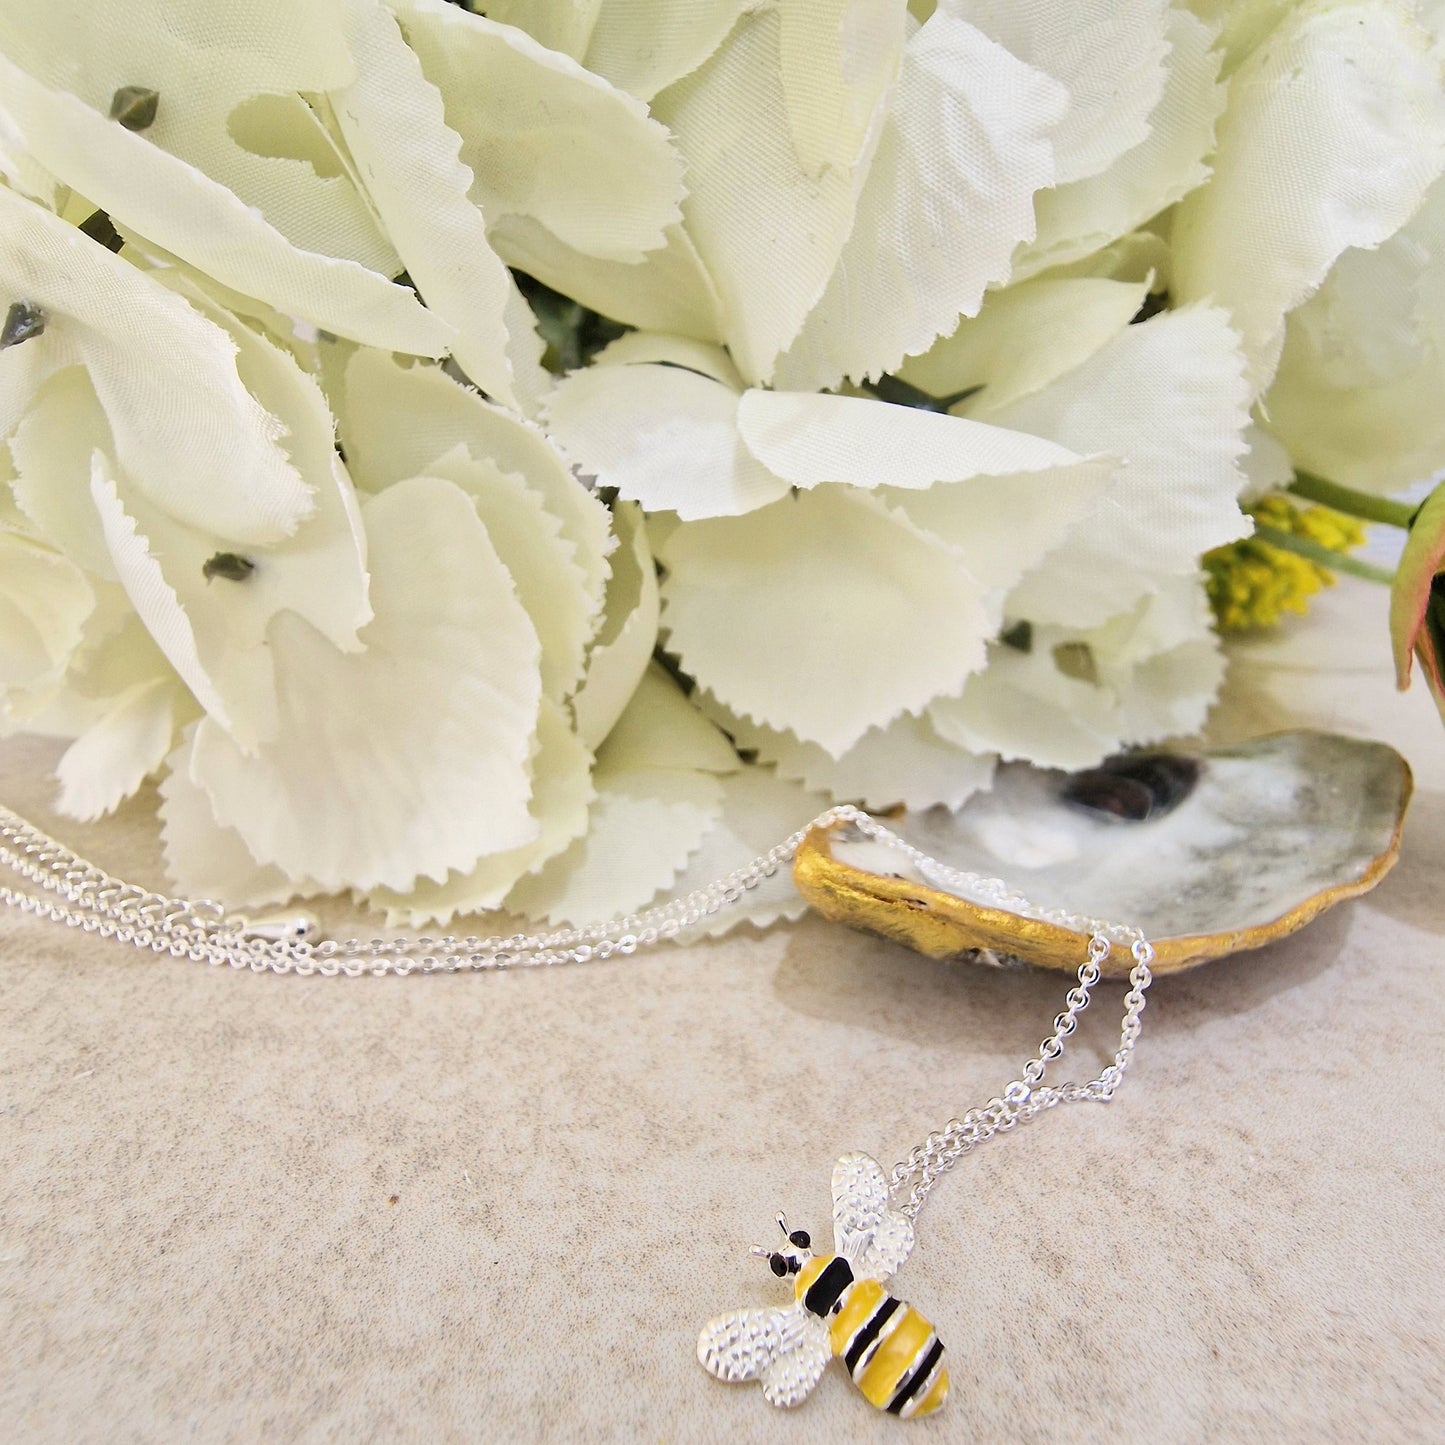 Bumble Bee Charm Necklace Silver Coloured Detailed